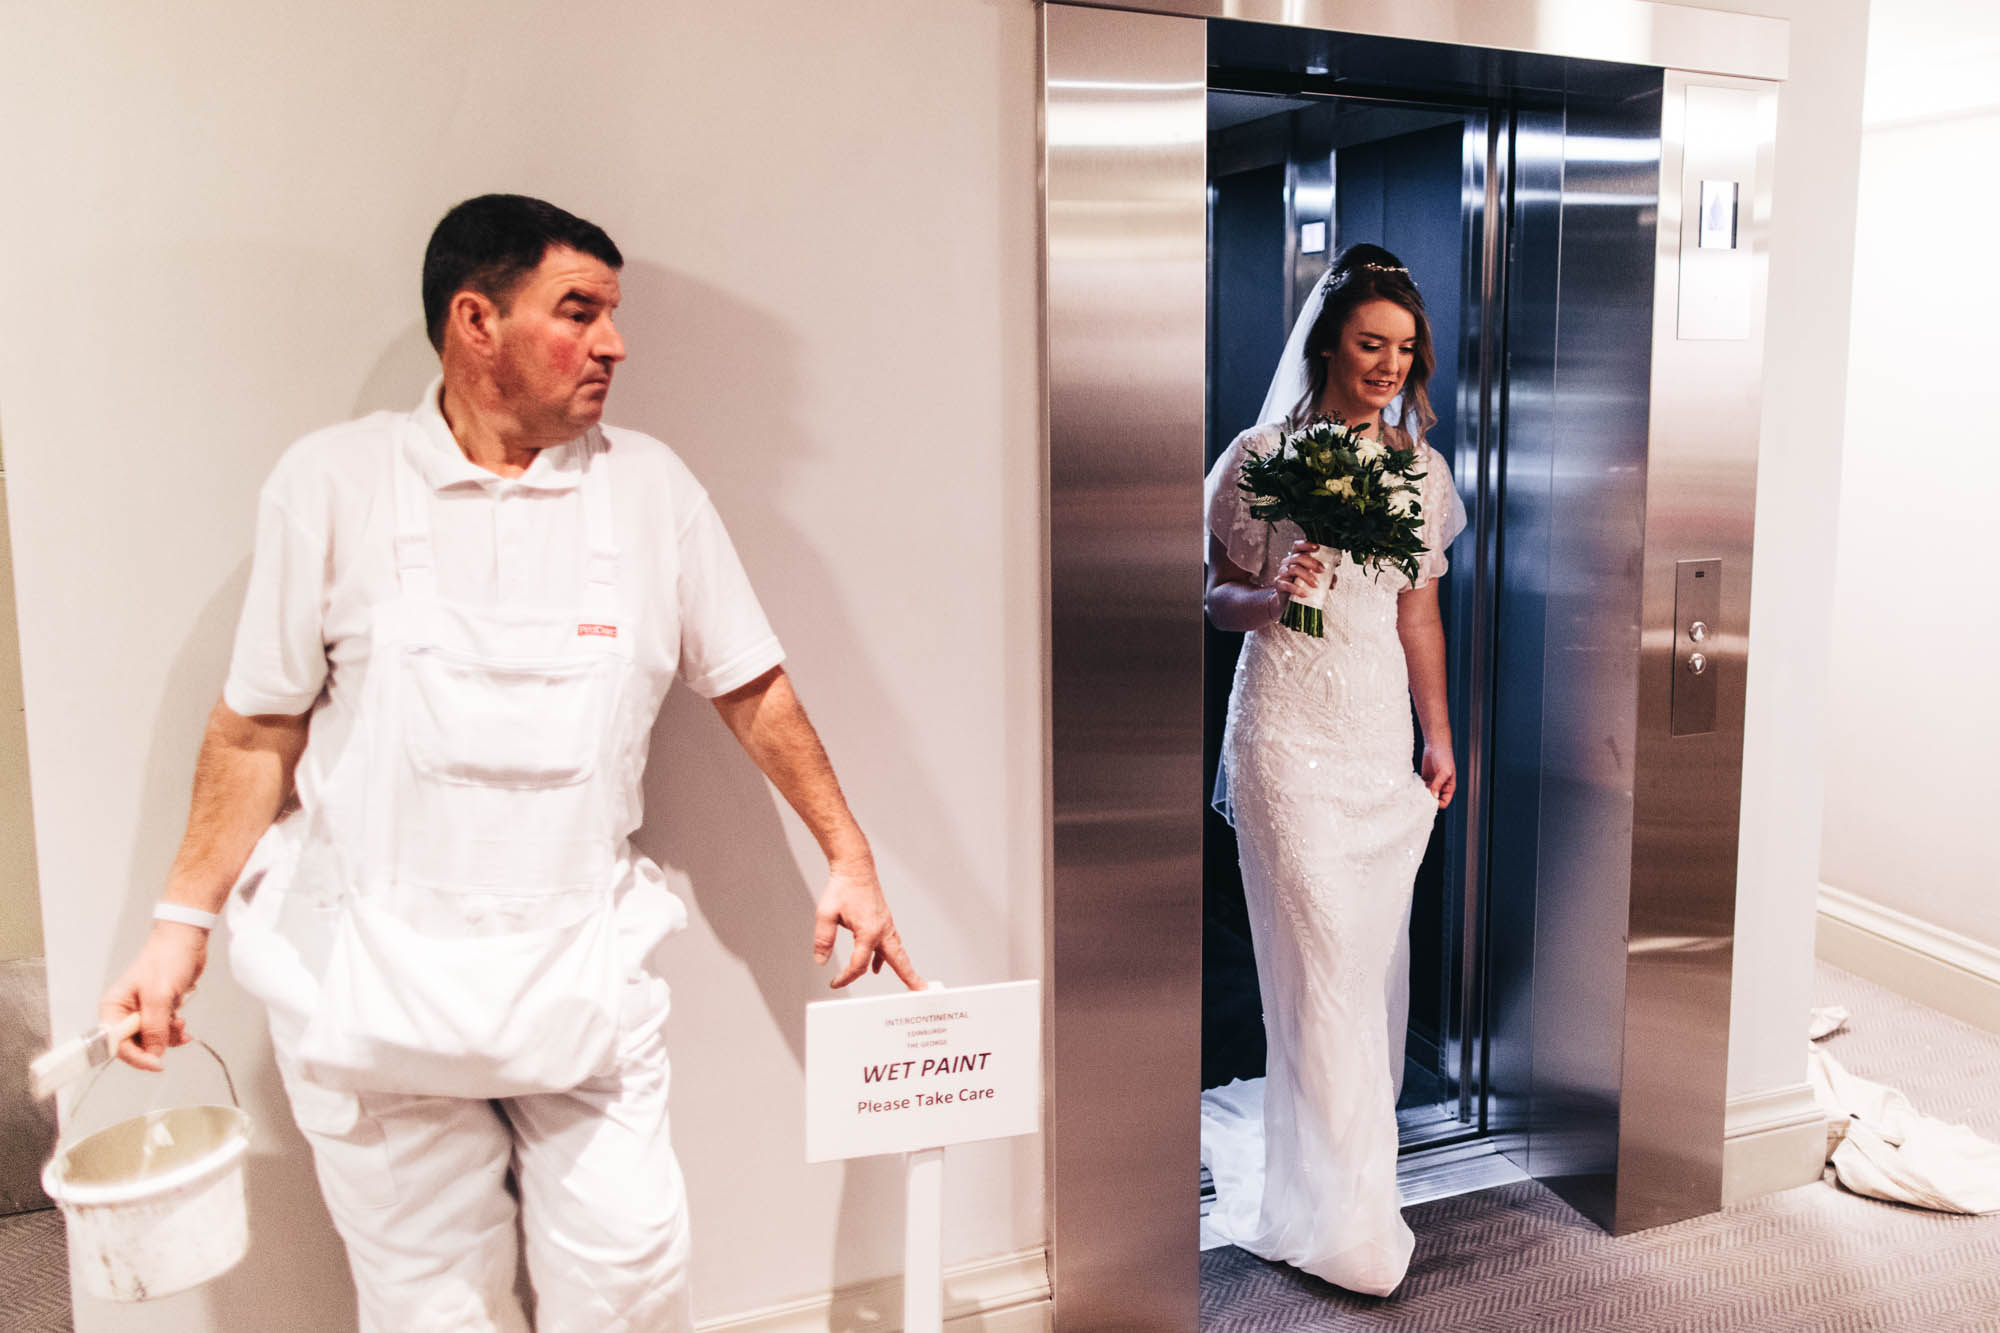 bride comes out of lift to find decorator there with paint brush in hand